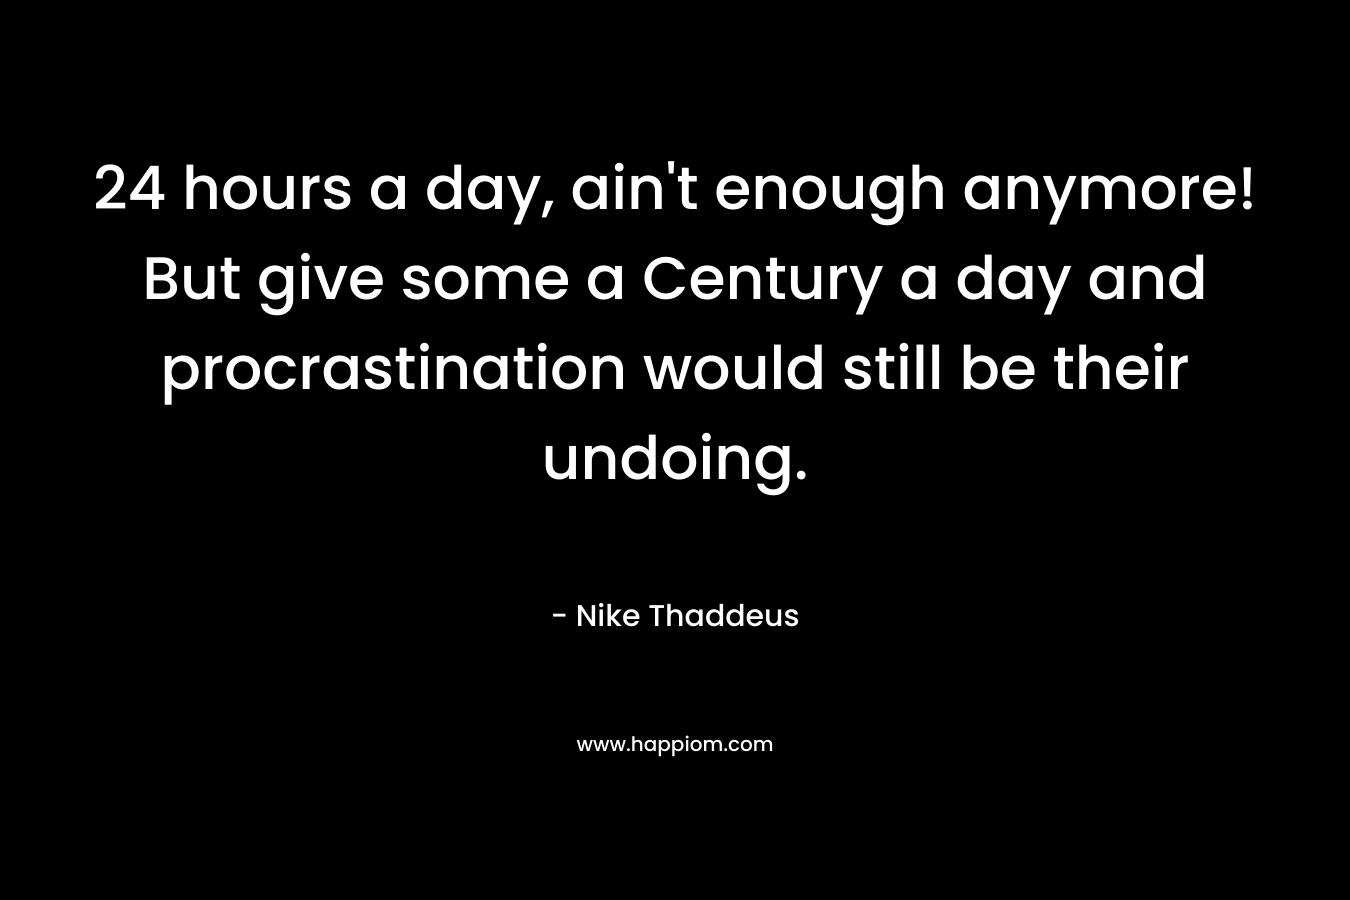 24 hours a day, ain't enough anymore! But give some a Century a day and procrastination would still be their undoing.